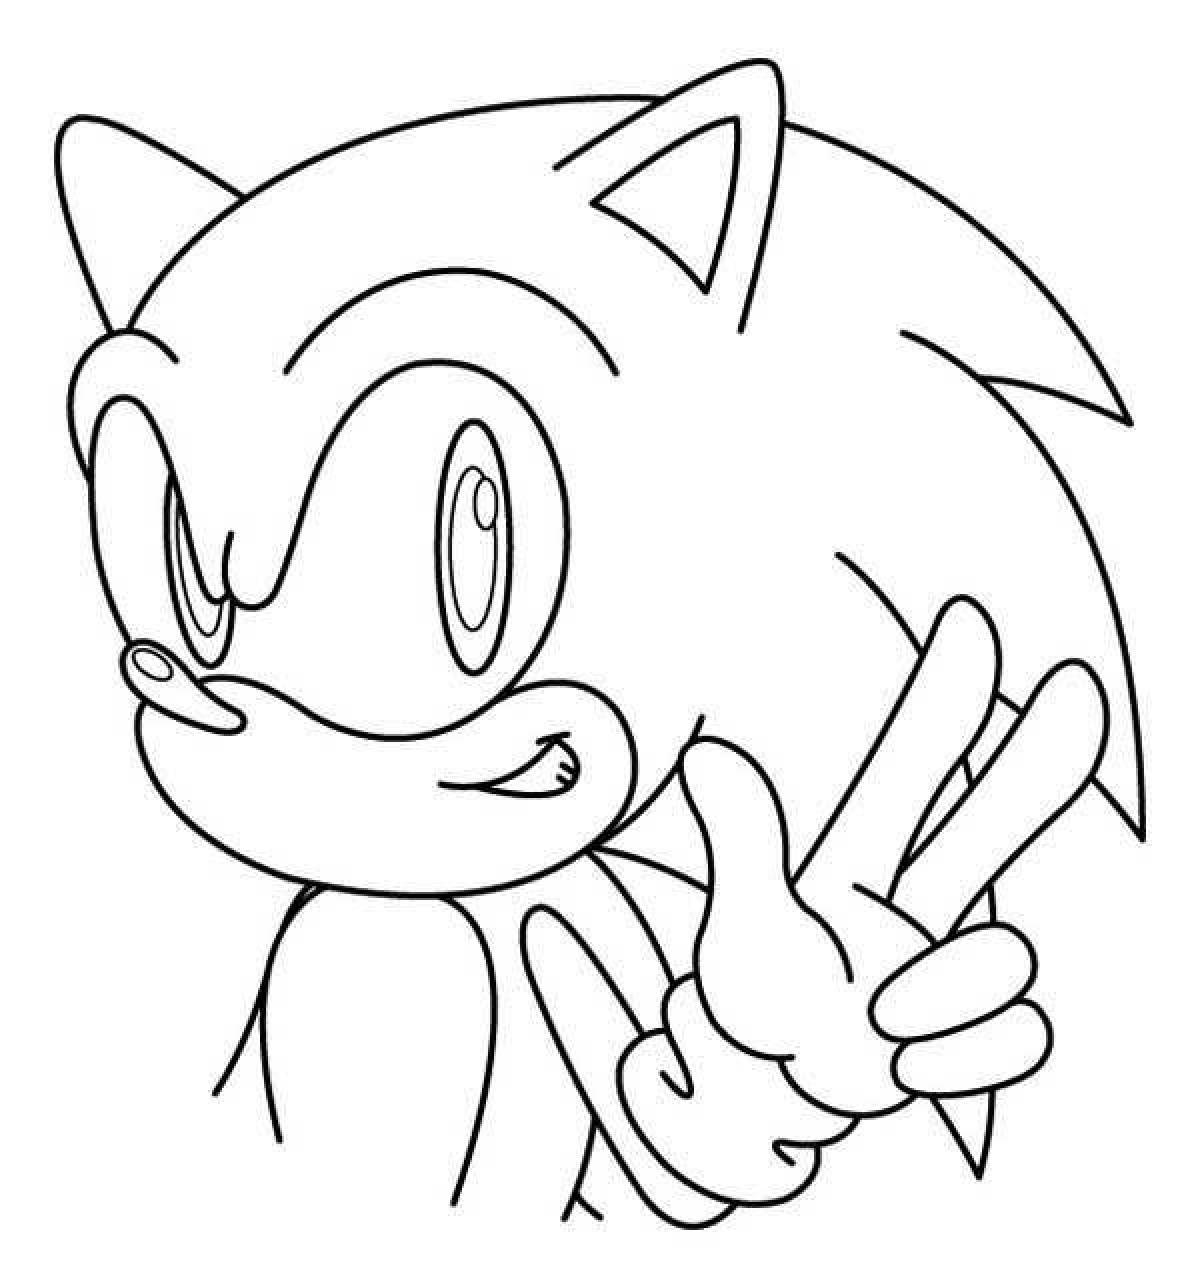 Sonic xz awesome coloring book